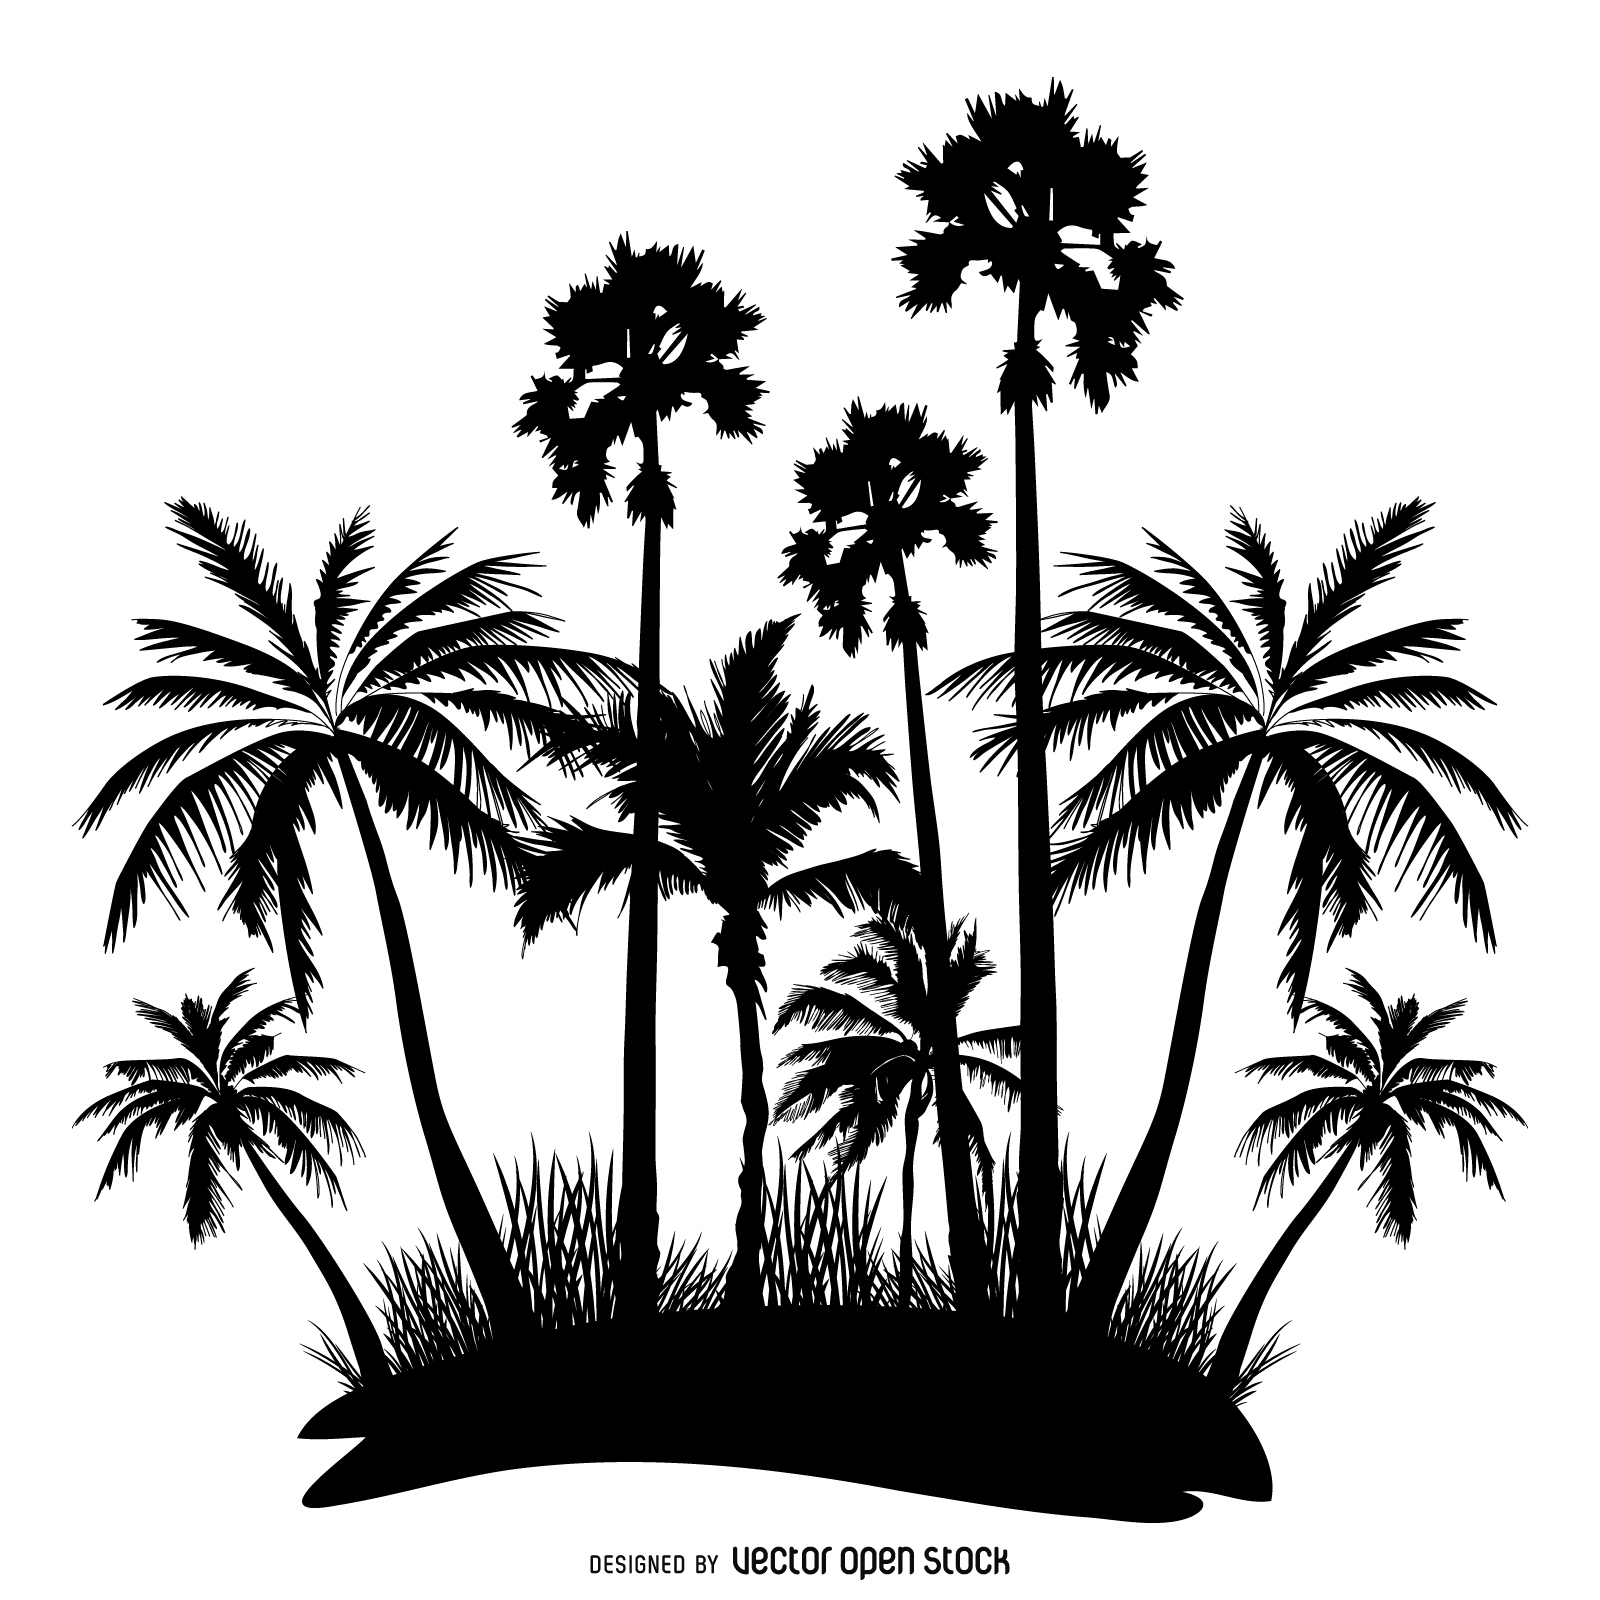 Palm trees silhouette - Vector download